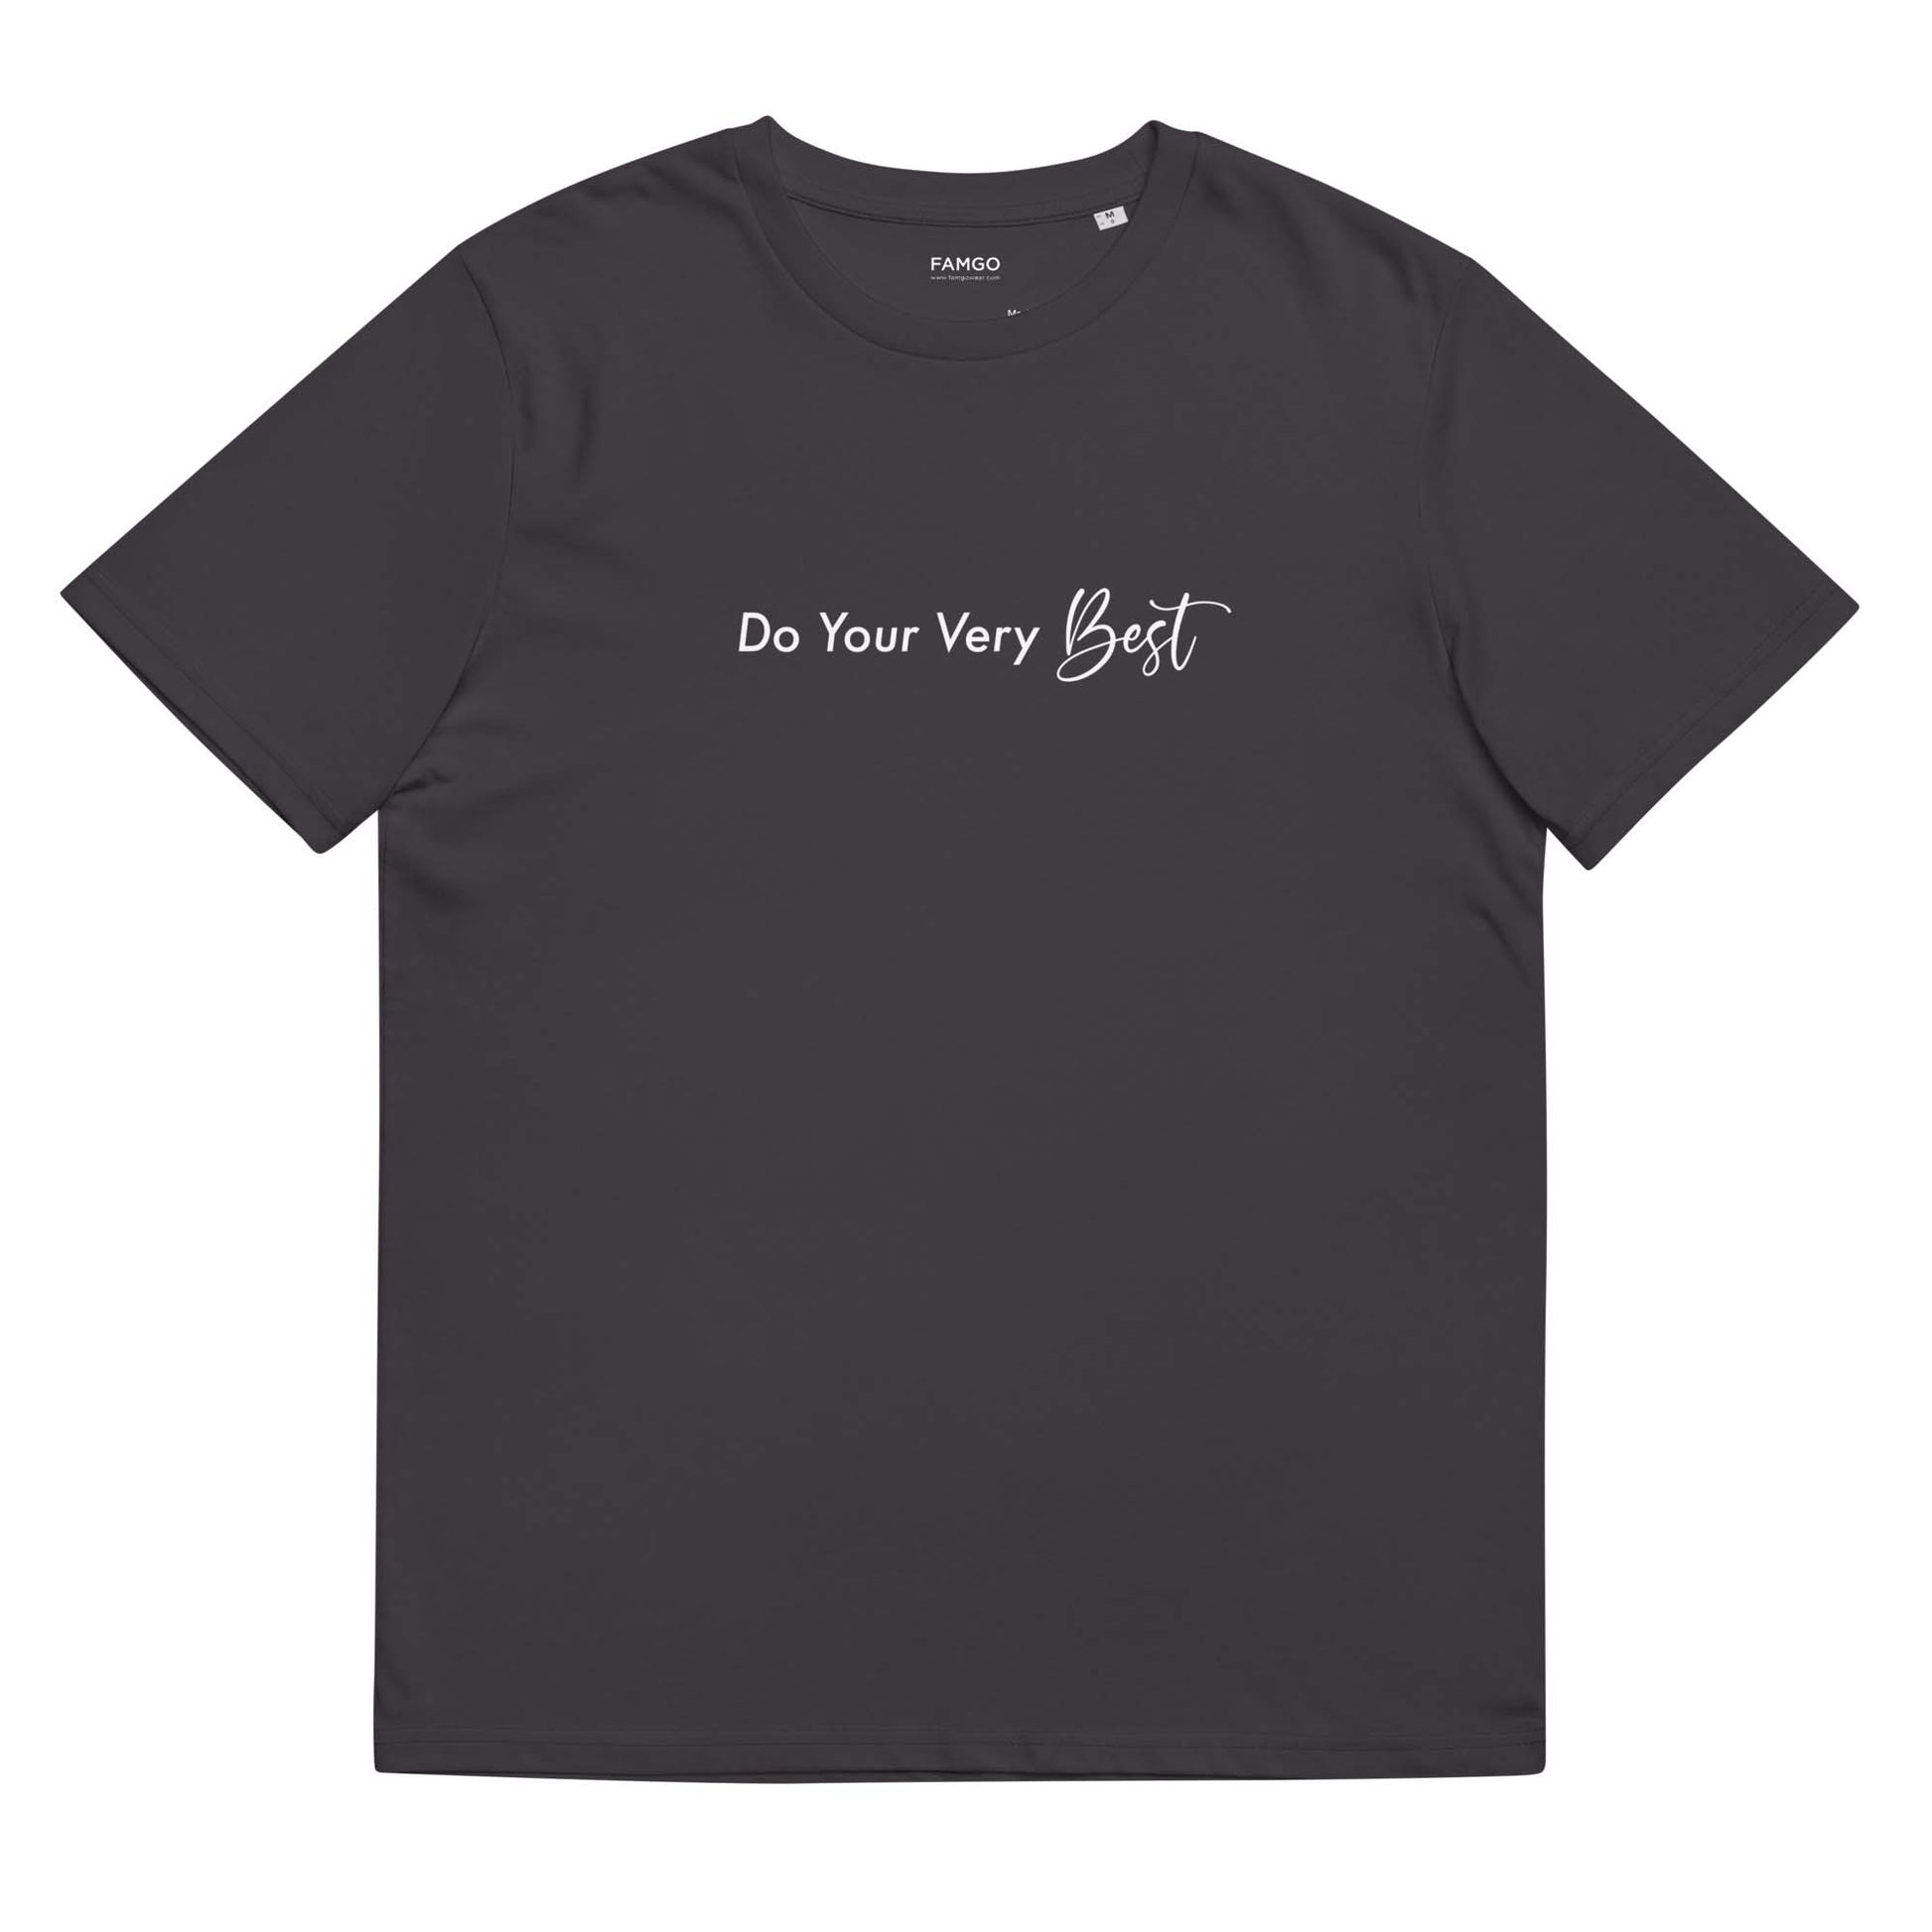 Men dark gray motivational t-shirt with motivational quote, "Do Your Very Best."